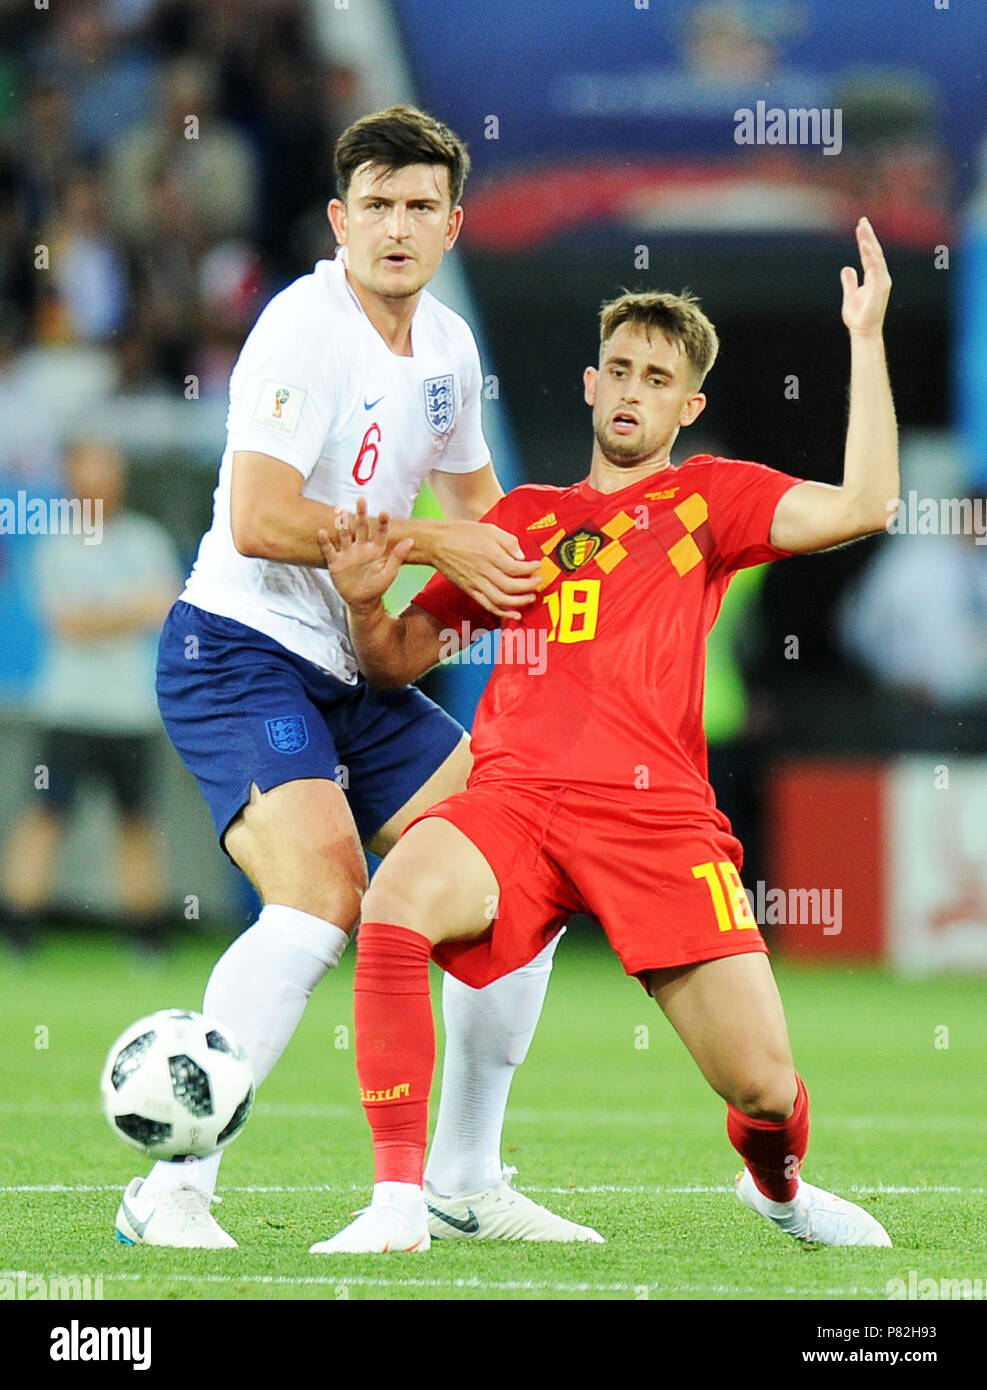 KALININGRAD, RUSSIA - JUNE 28: Harry Maguire of England competes with Adnan Januzaj of Belgium during the 2018 FIFA World Cup Russia group G match between England and Belgium at Kaliningrad Stadium on June 28, 2018 in Kaliningrad, Russia. (Photo by Norbert Barczyk/PressFocus/MB Media/) Stock Photo